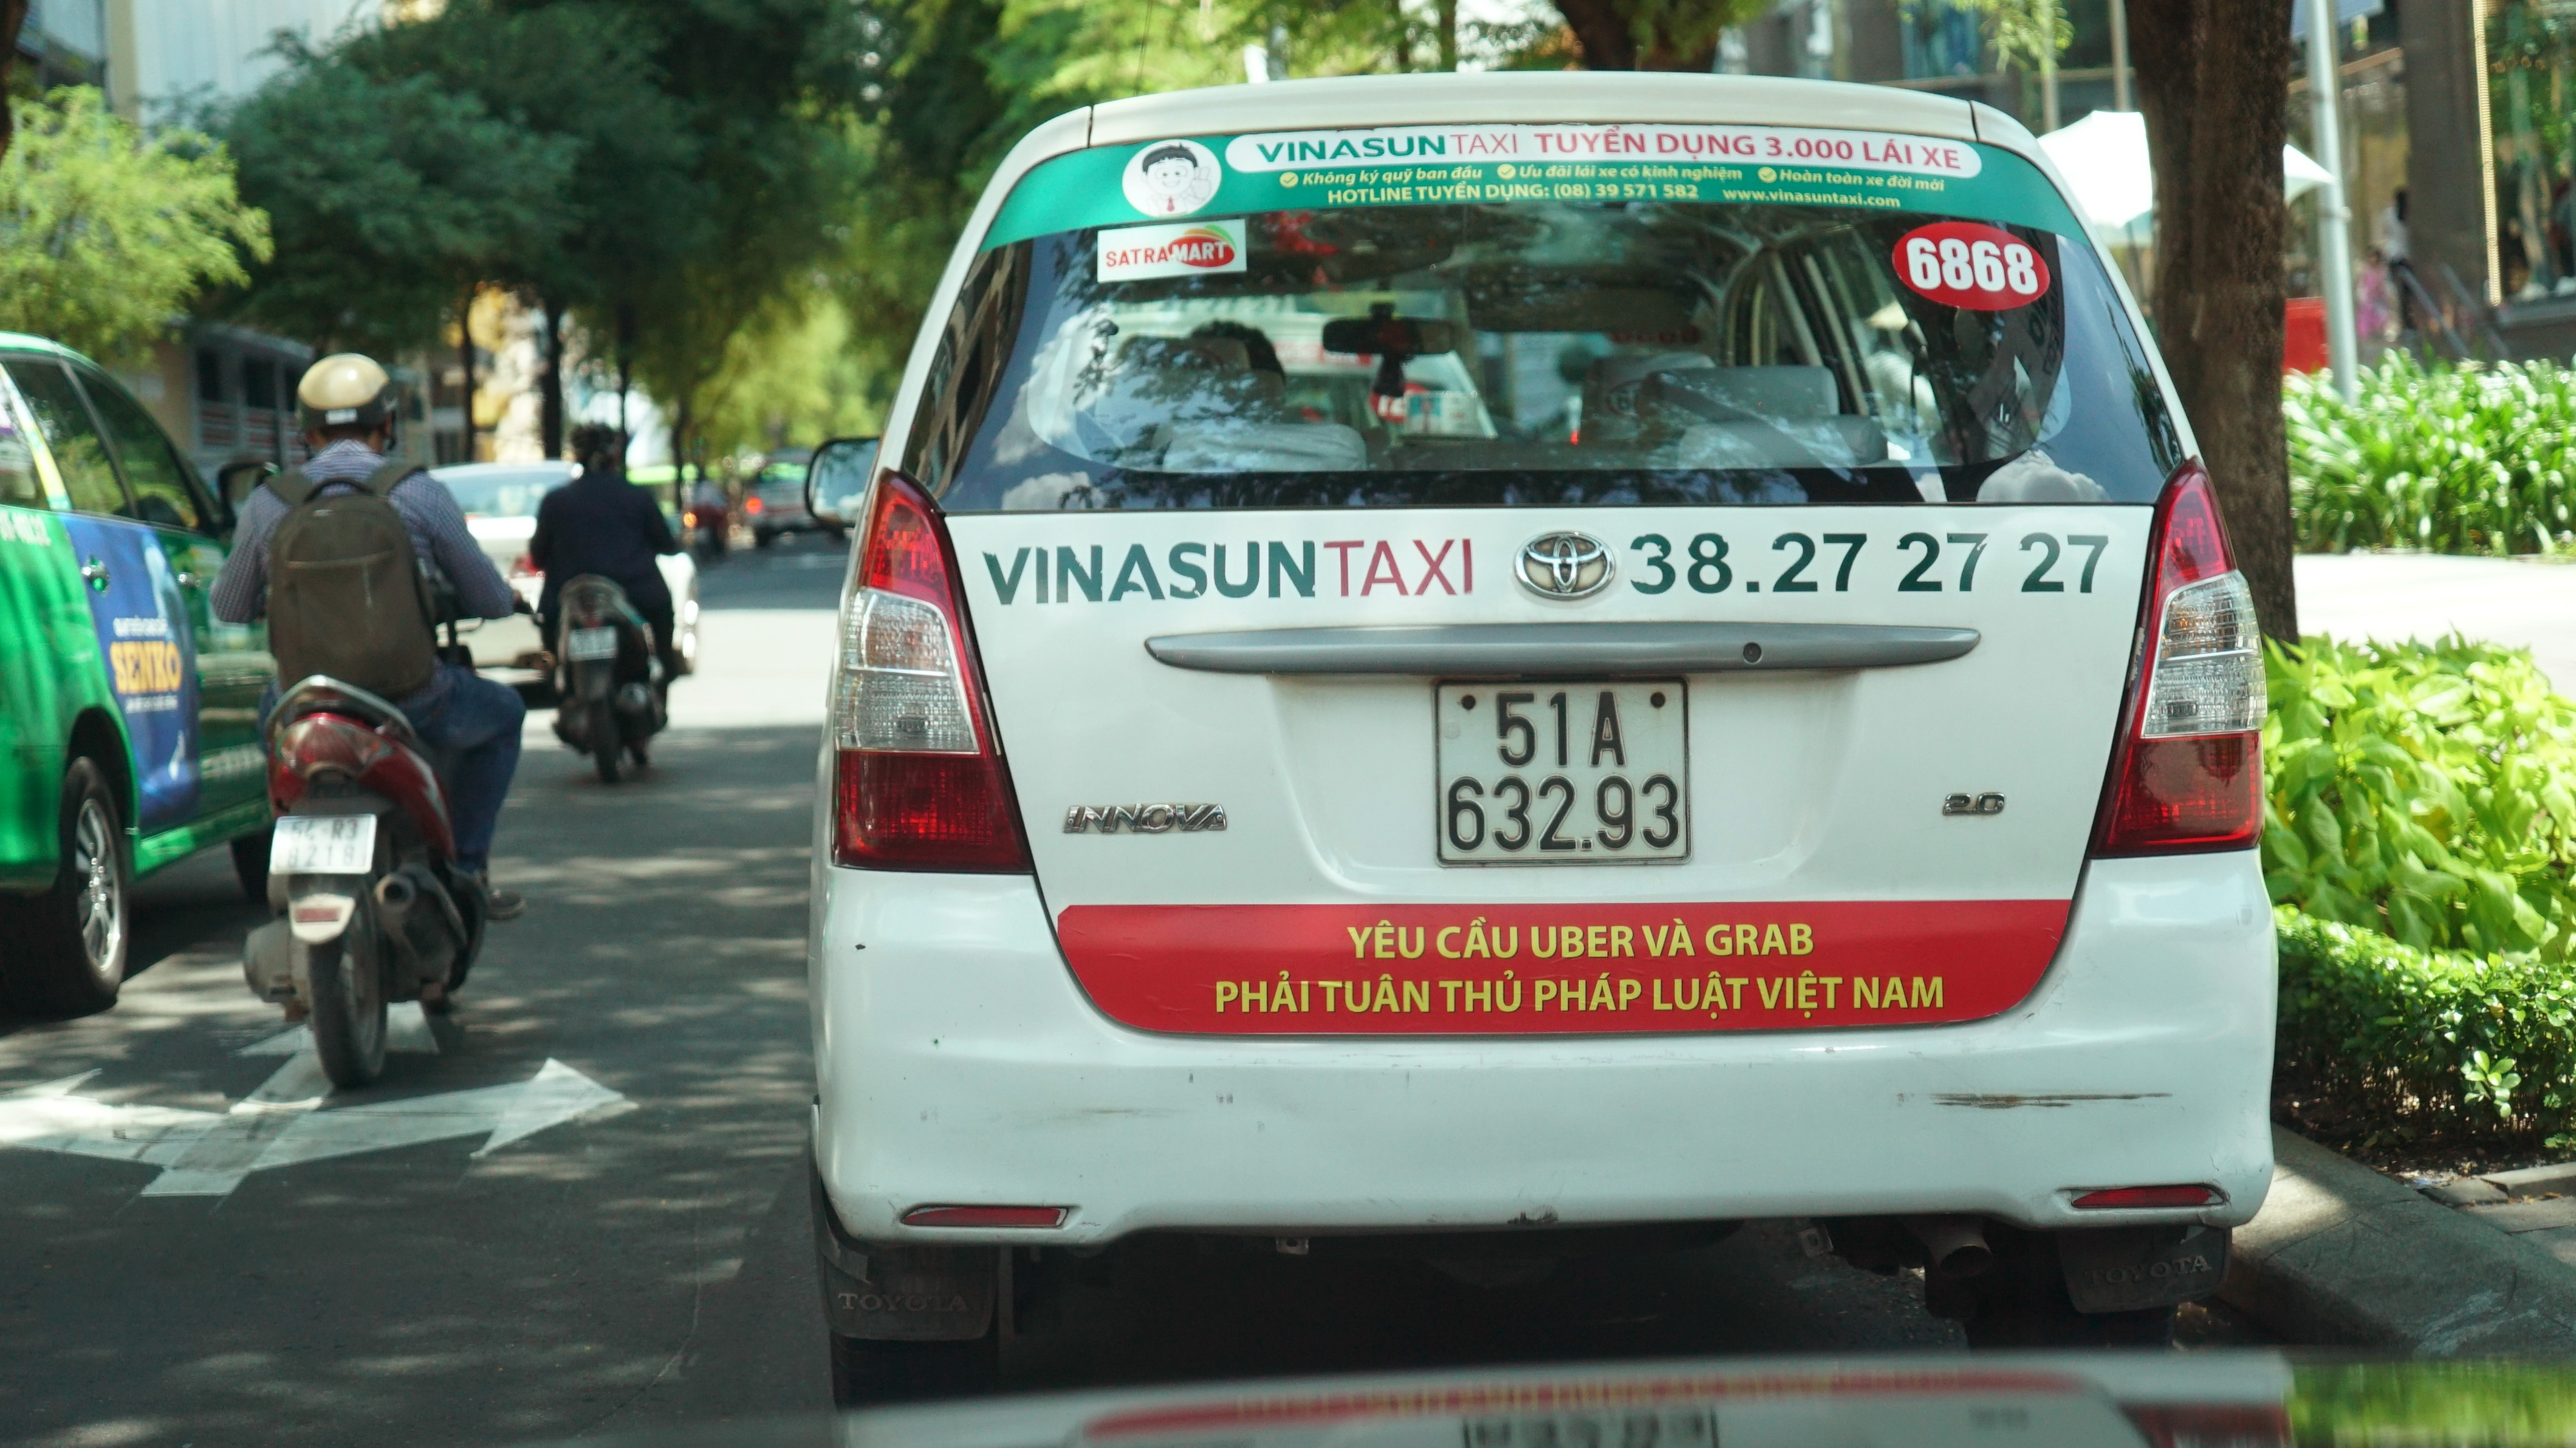 A Vinasun taxi with a bumper sticker carrying the message ‘Uber and Grab must comply with Vietnamese law’ in Ho Chi Minh City. Photo: Tuoi Tre